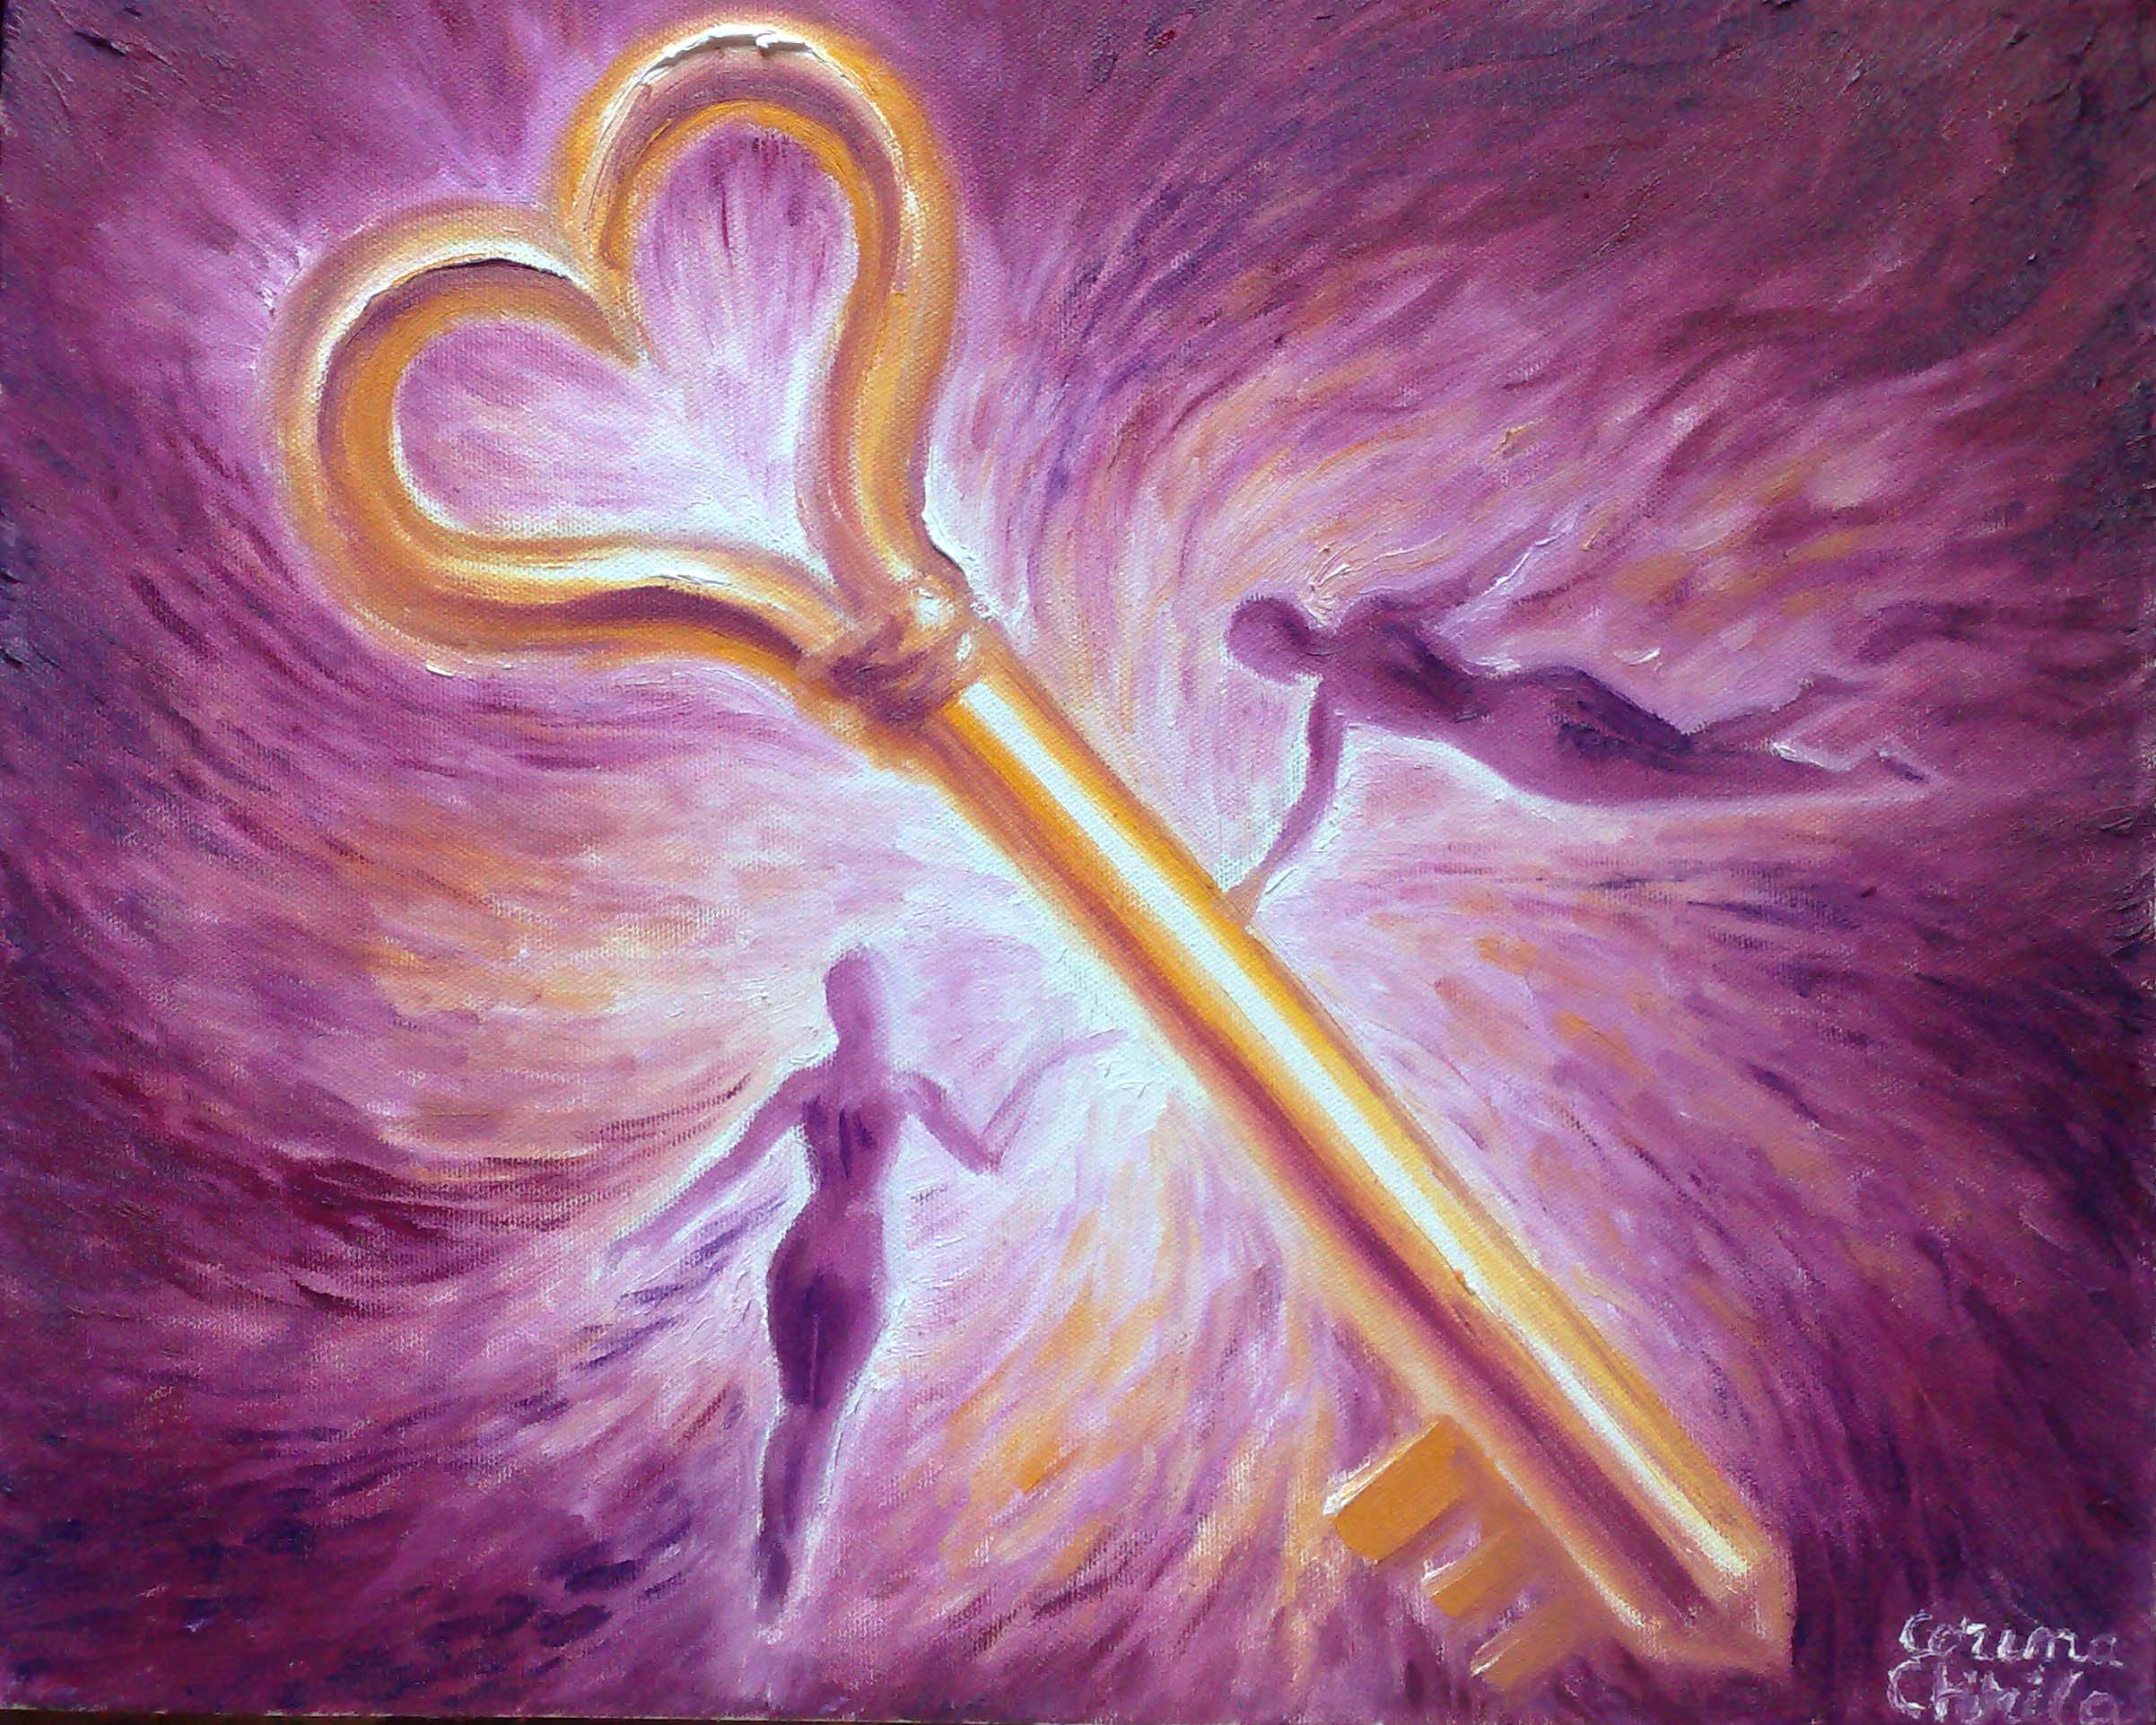 cheia-iubirii-pictura-ulei-pe-panza-the-key-of-love-oil-on-canvas-painting